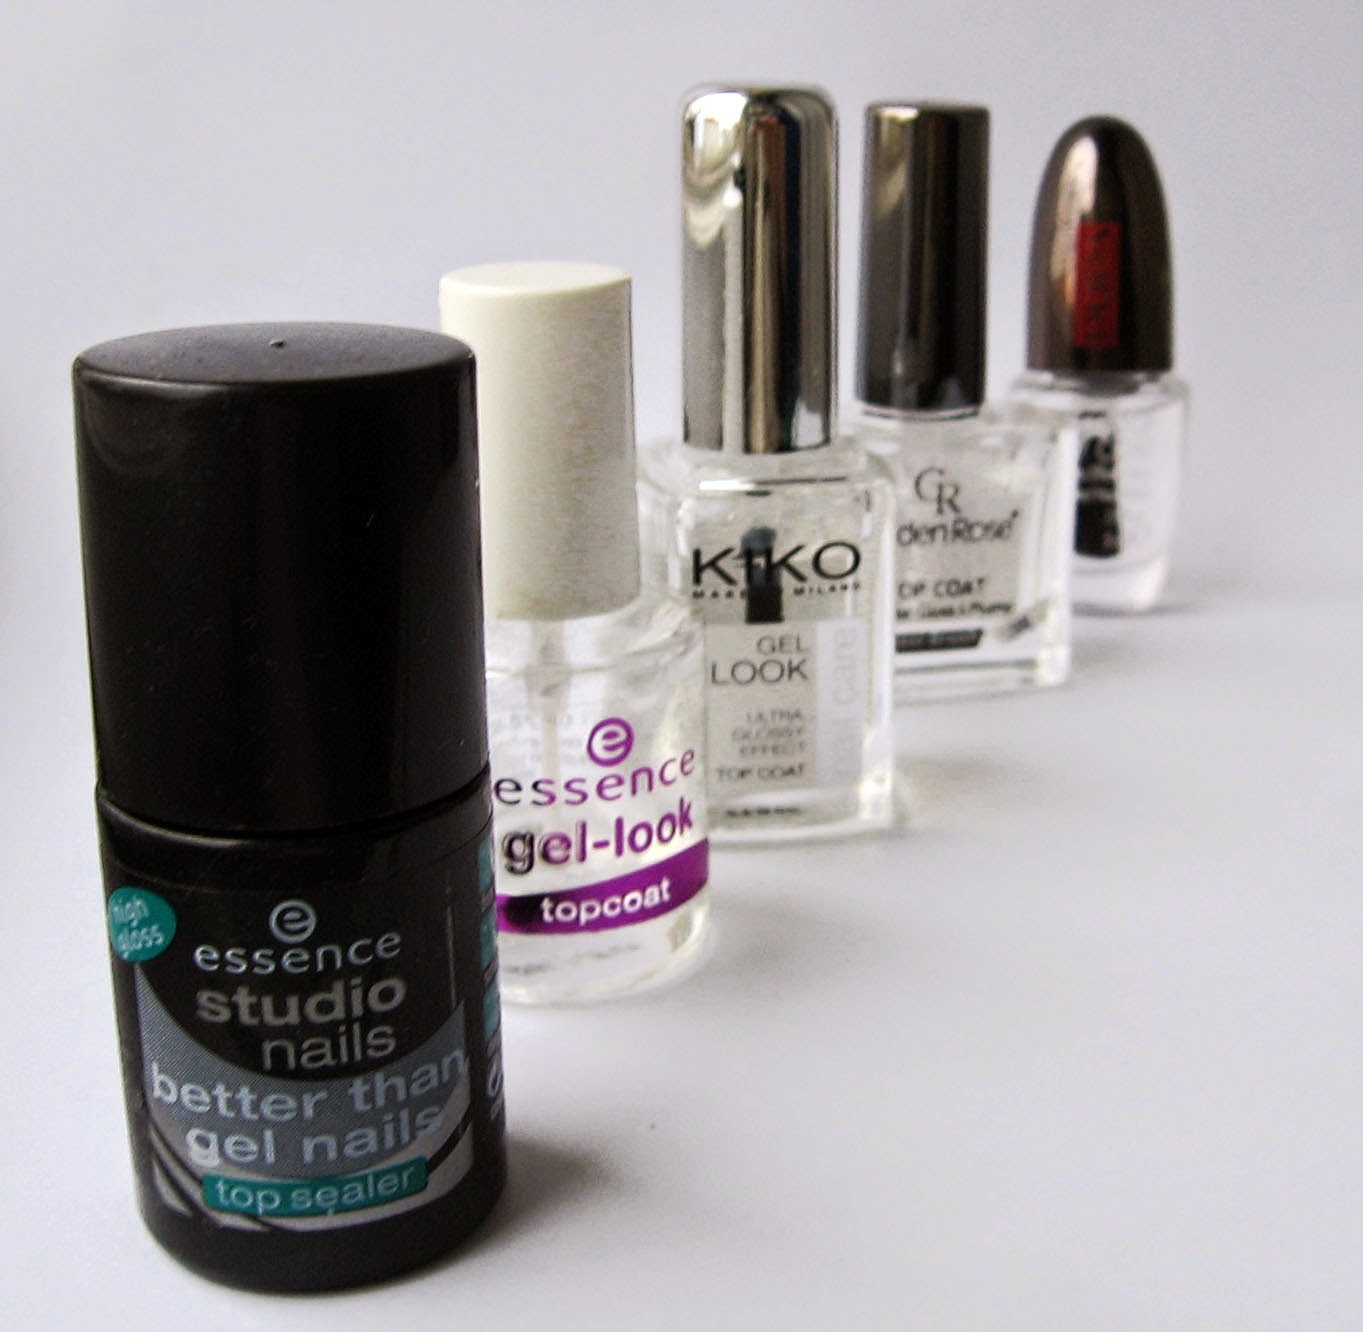 essence the gel nail polish top coat review